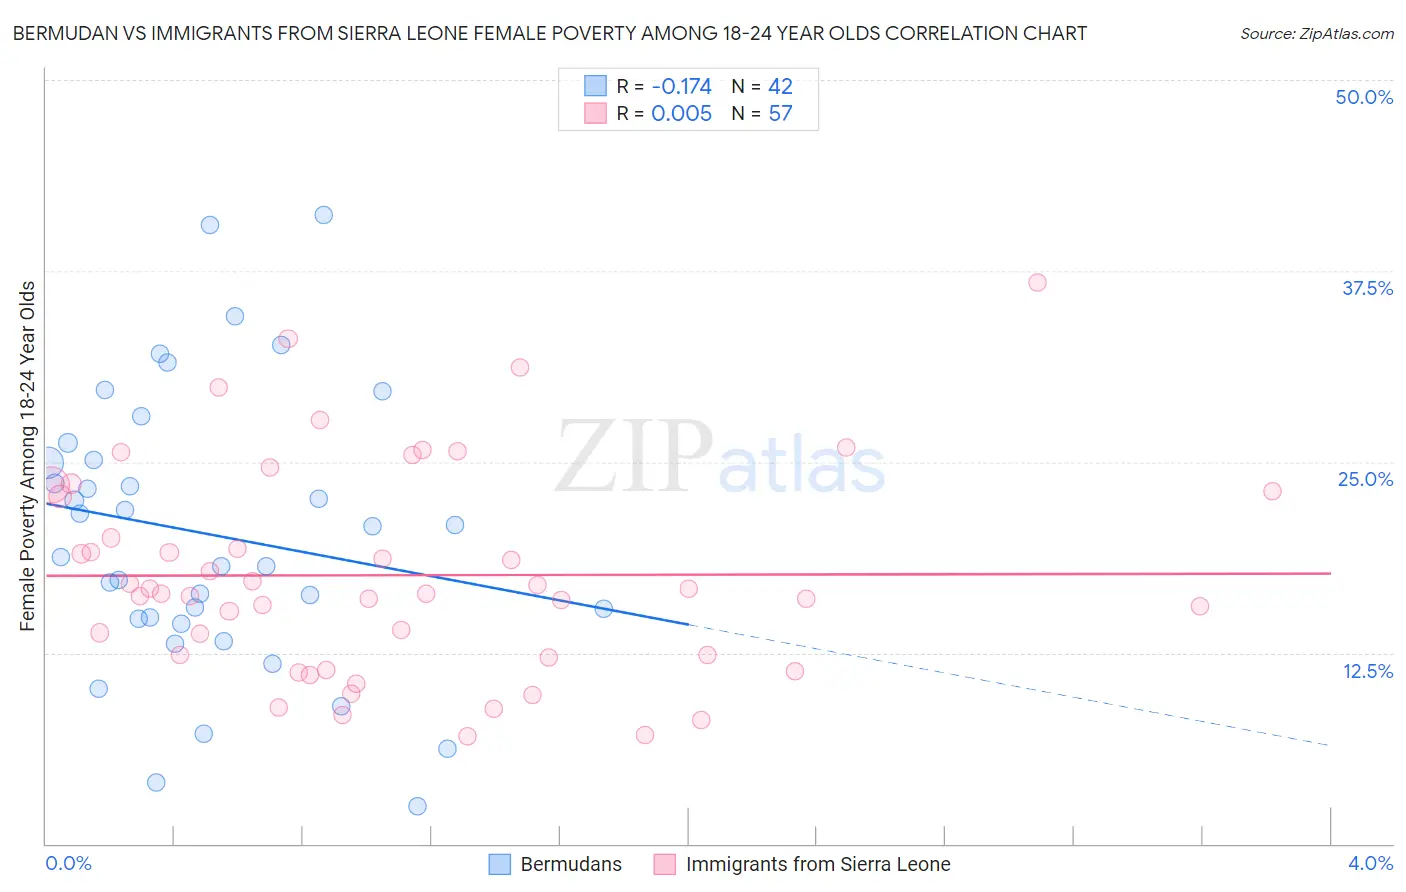 Bermudan vs Immigrants from Sierra Leone Female Poverty Among 18-24 Year Olds